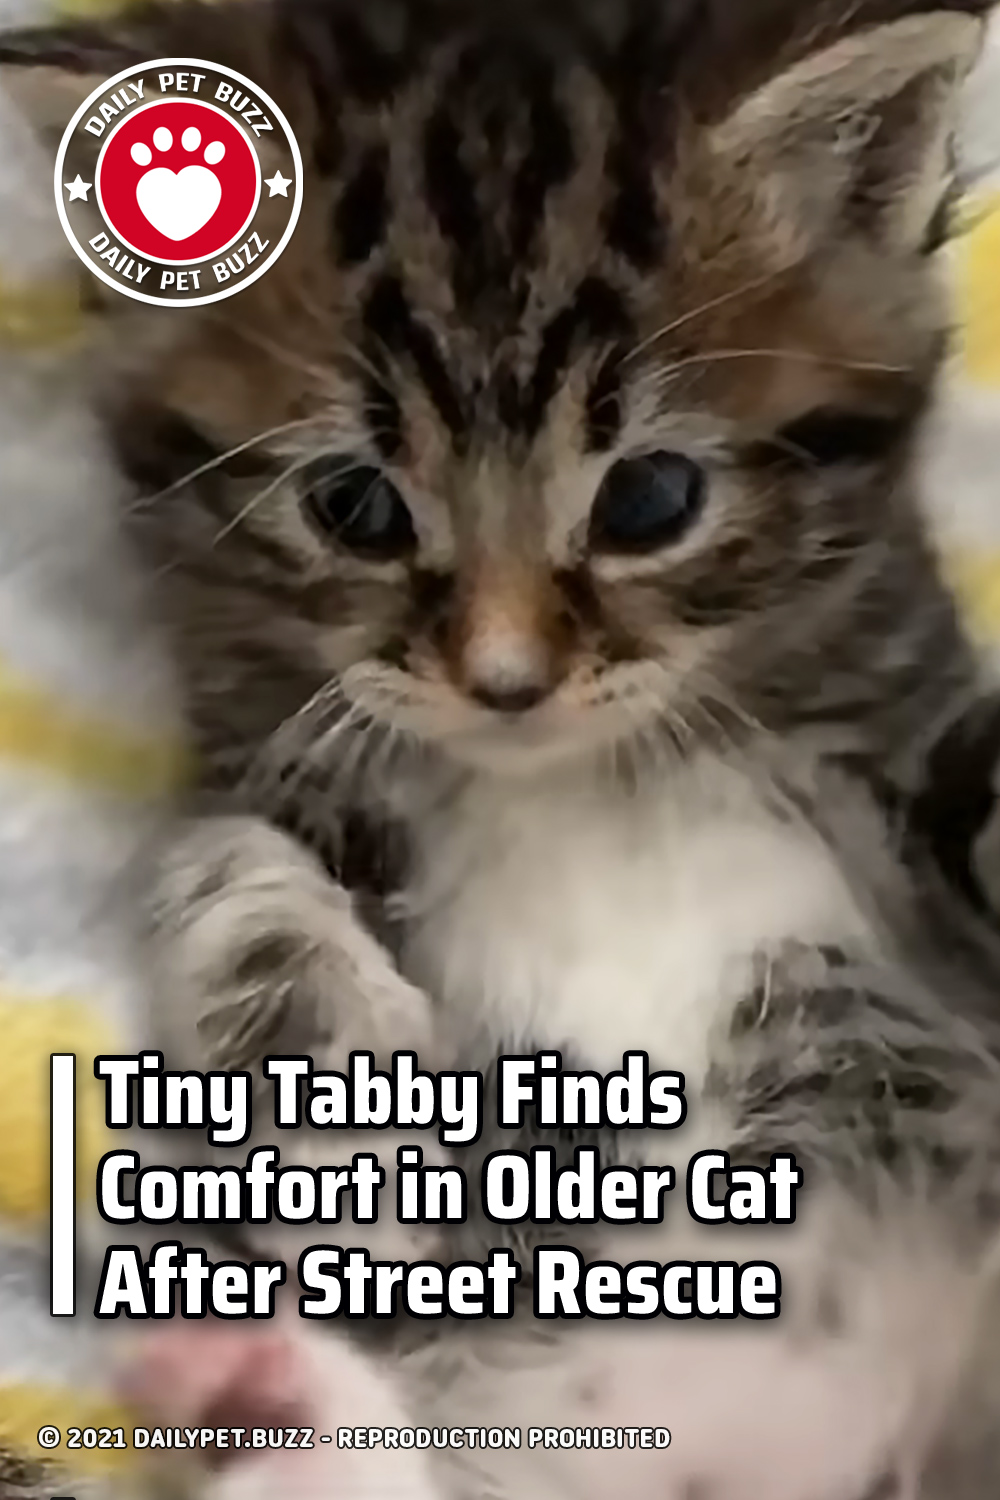 Tiny Tabby Finds Comfort in Older Cat After Street Rescue